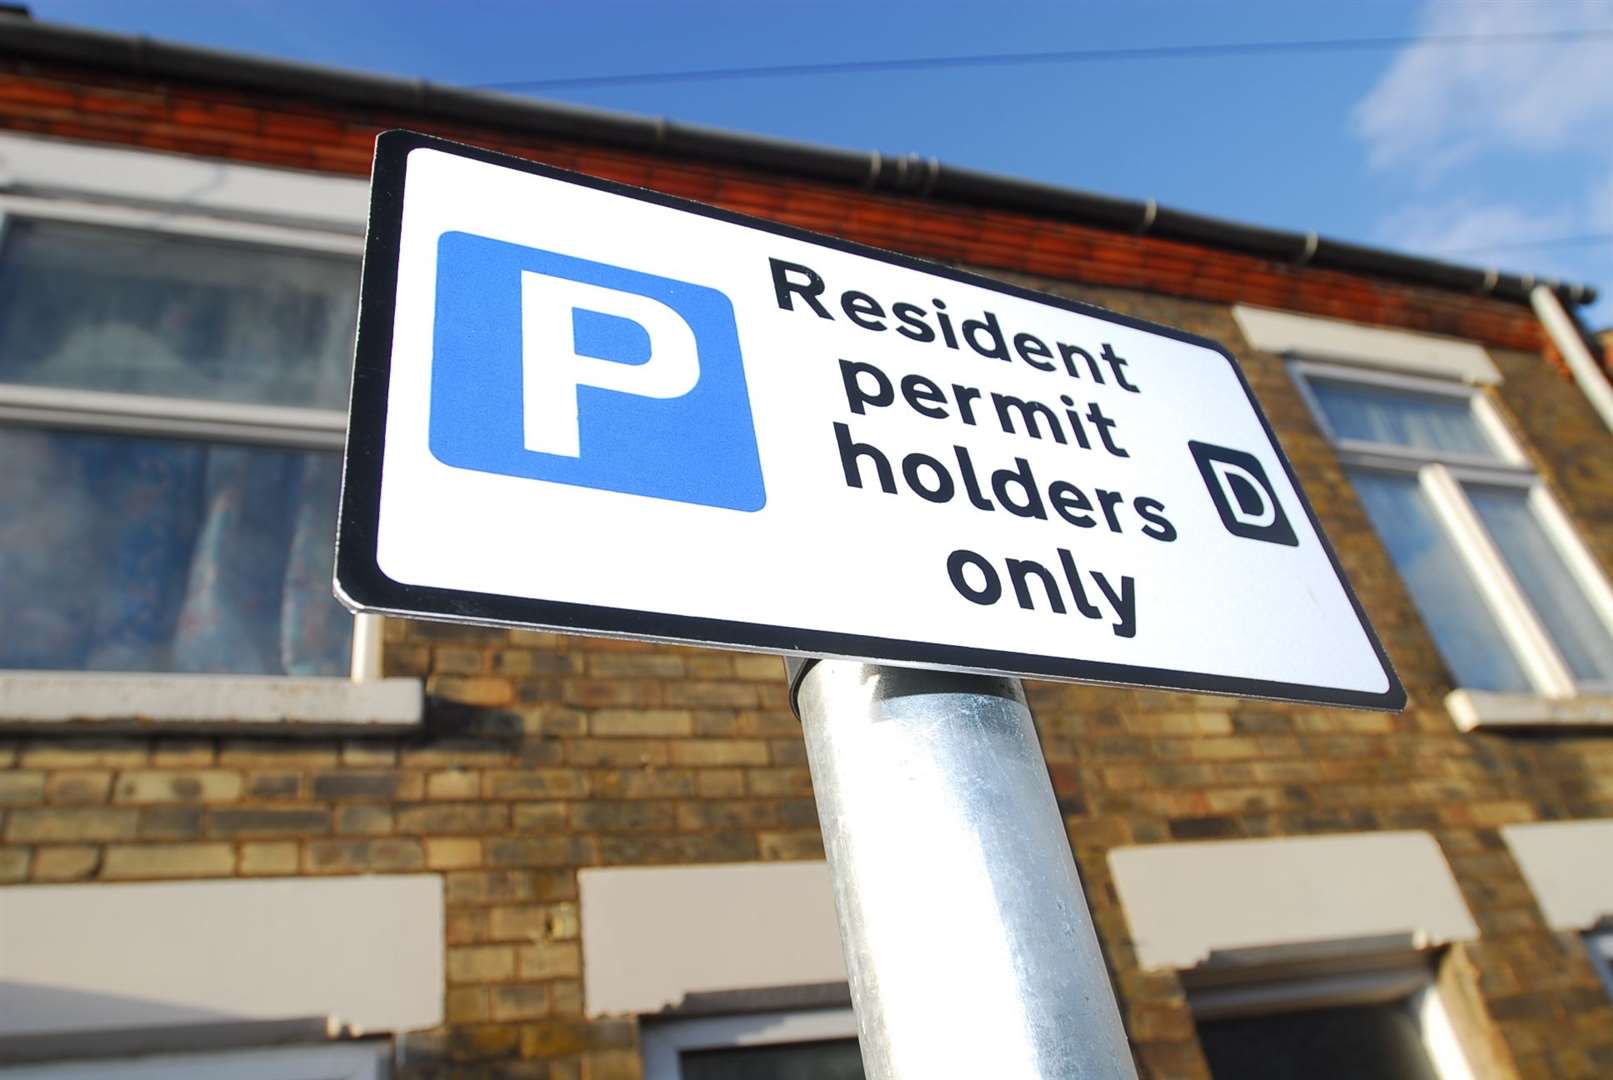 People displaying valid resident permits will still be able to use off-street car parks for free